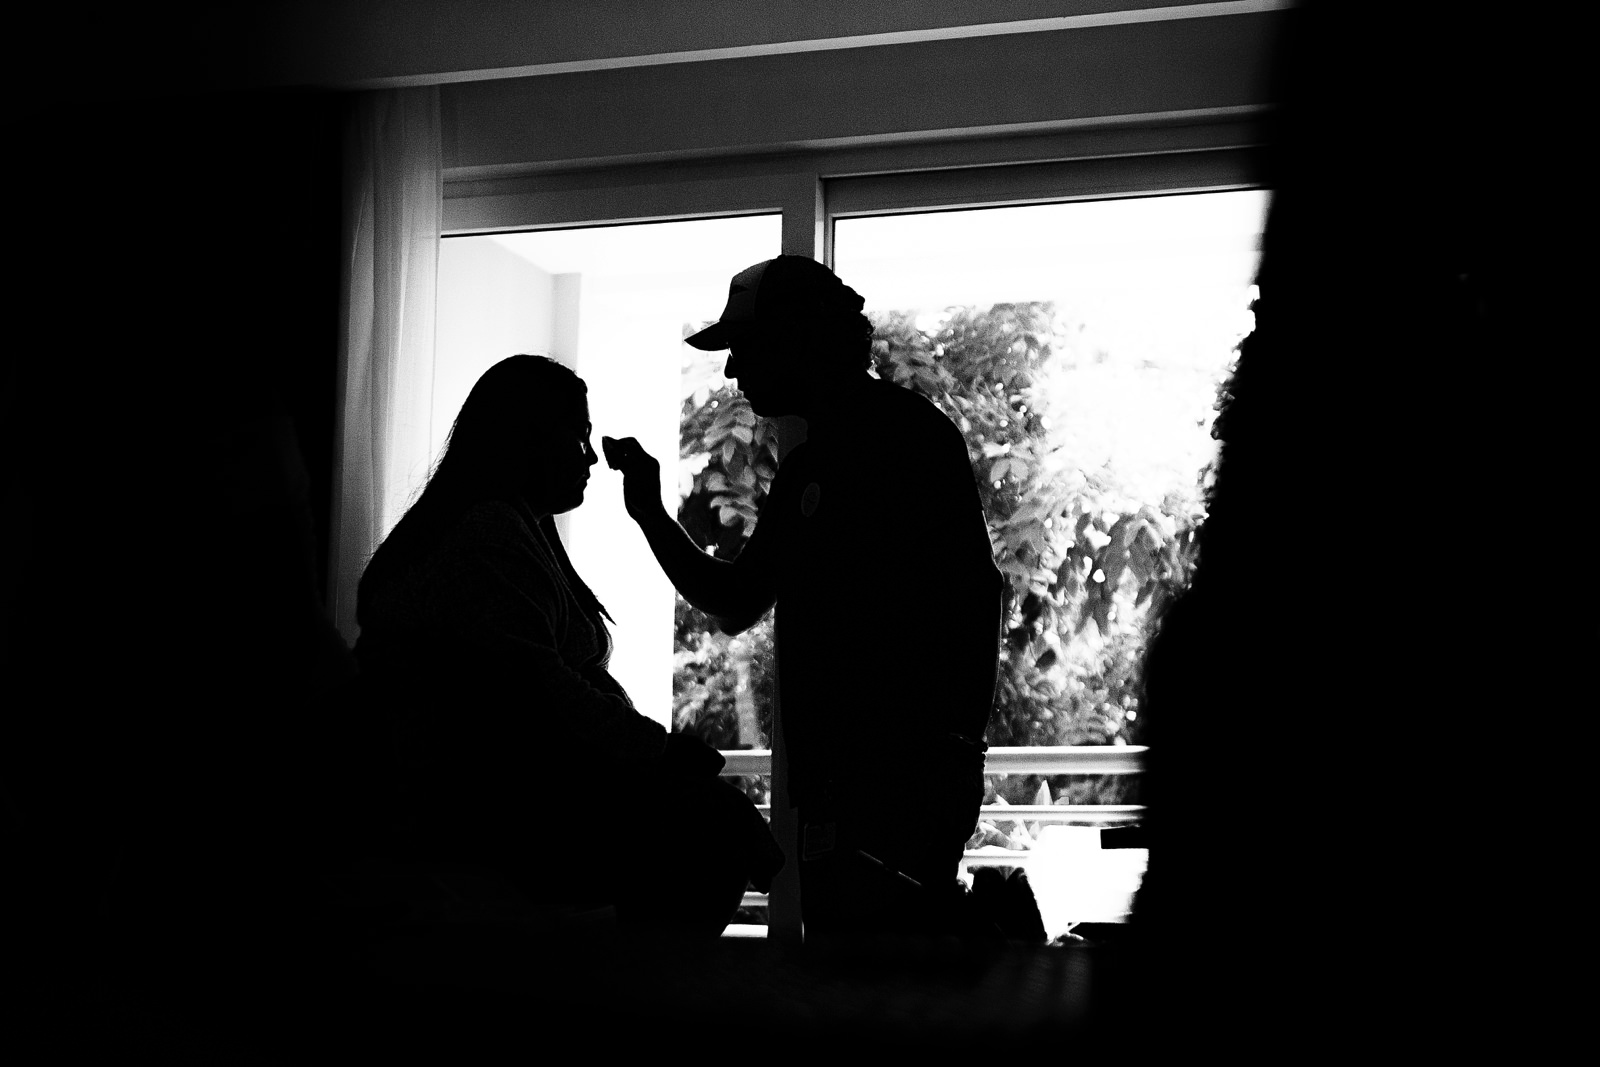 Silhouette of the bride getting her make up before the ceremony